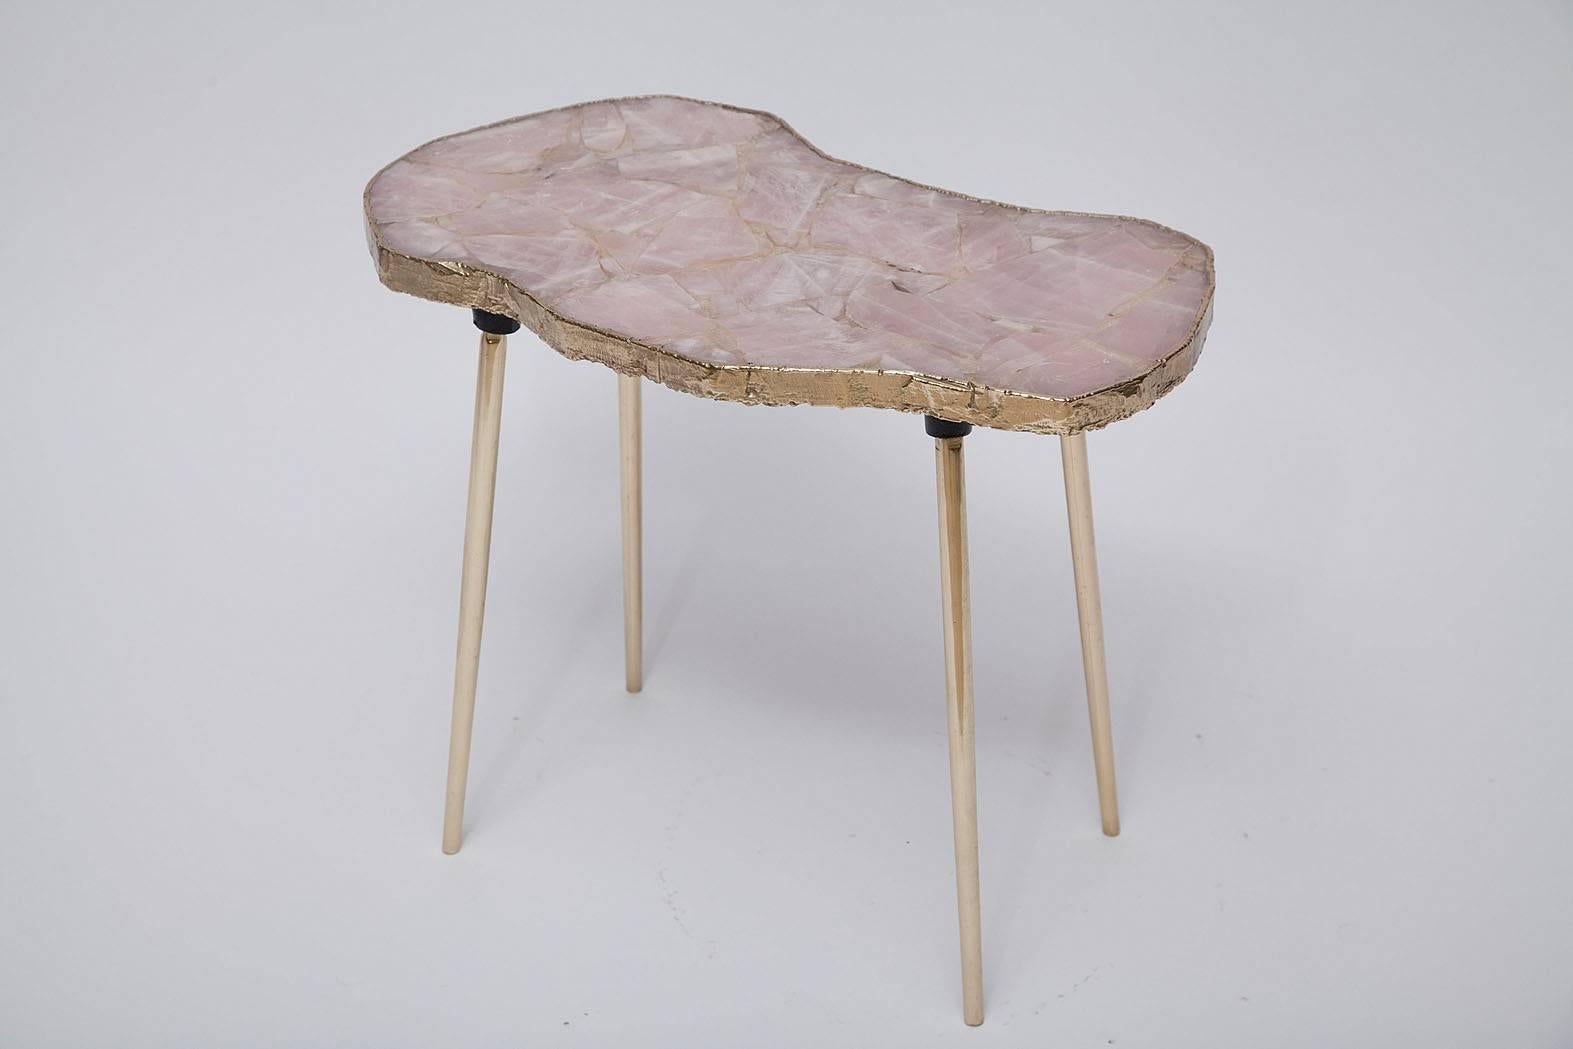 Romantic and rugged - organic rose quartz side table. Rose quartz specimens set in resin with brass soldered free edges and brass finished legs.